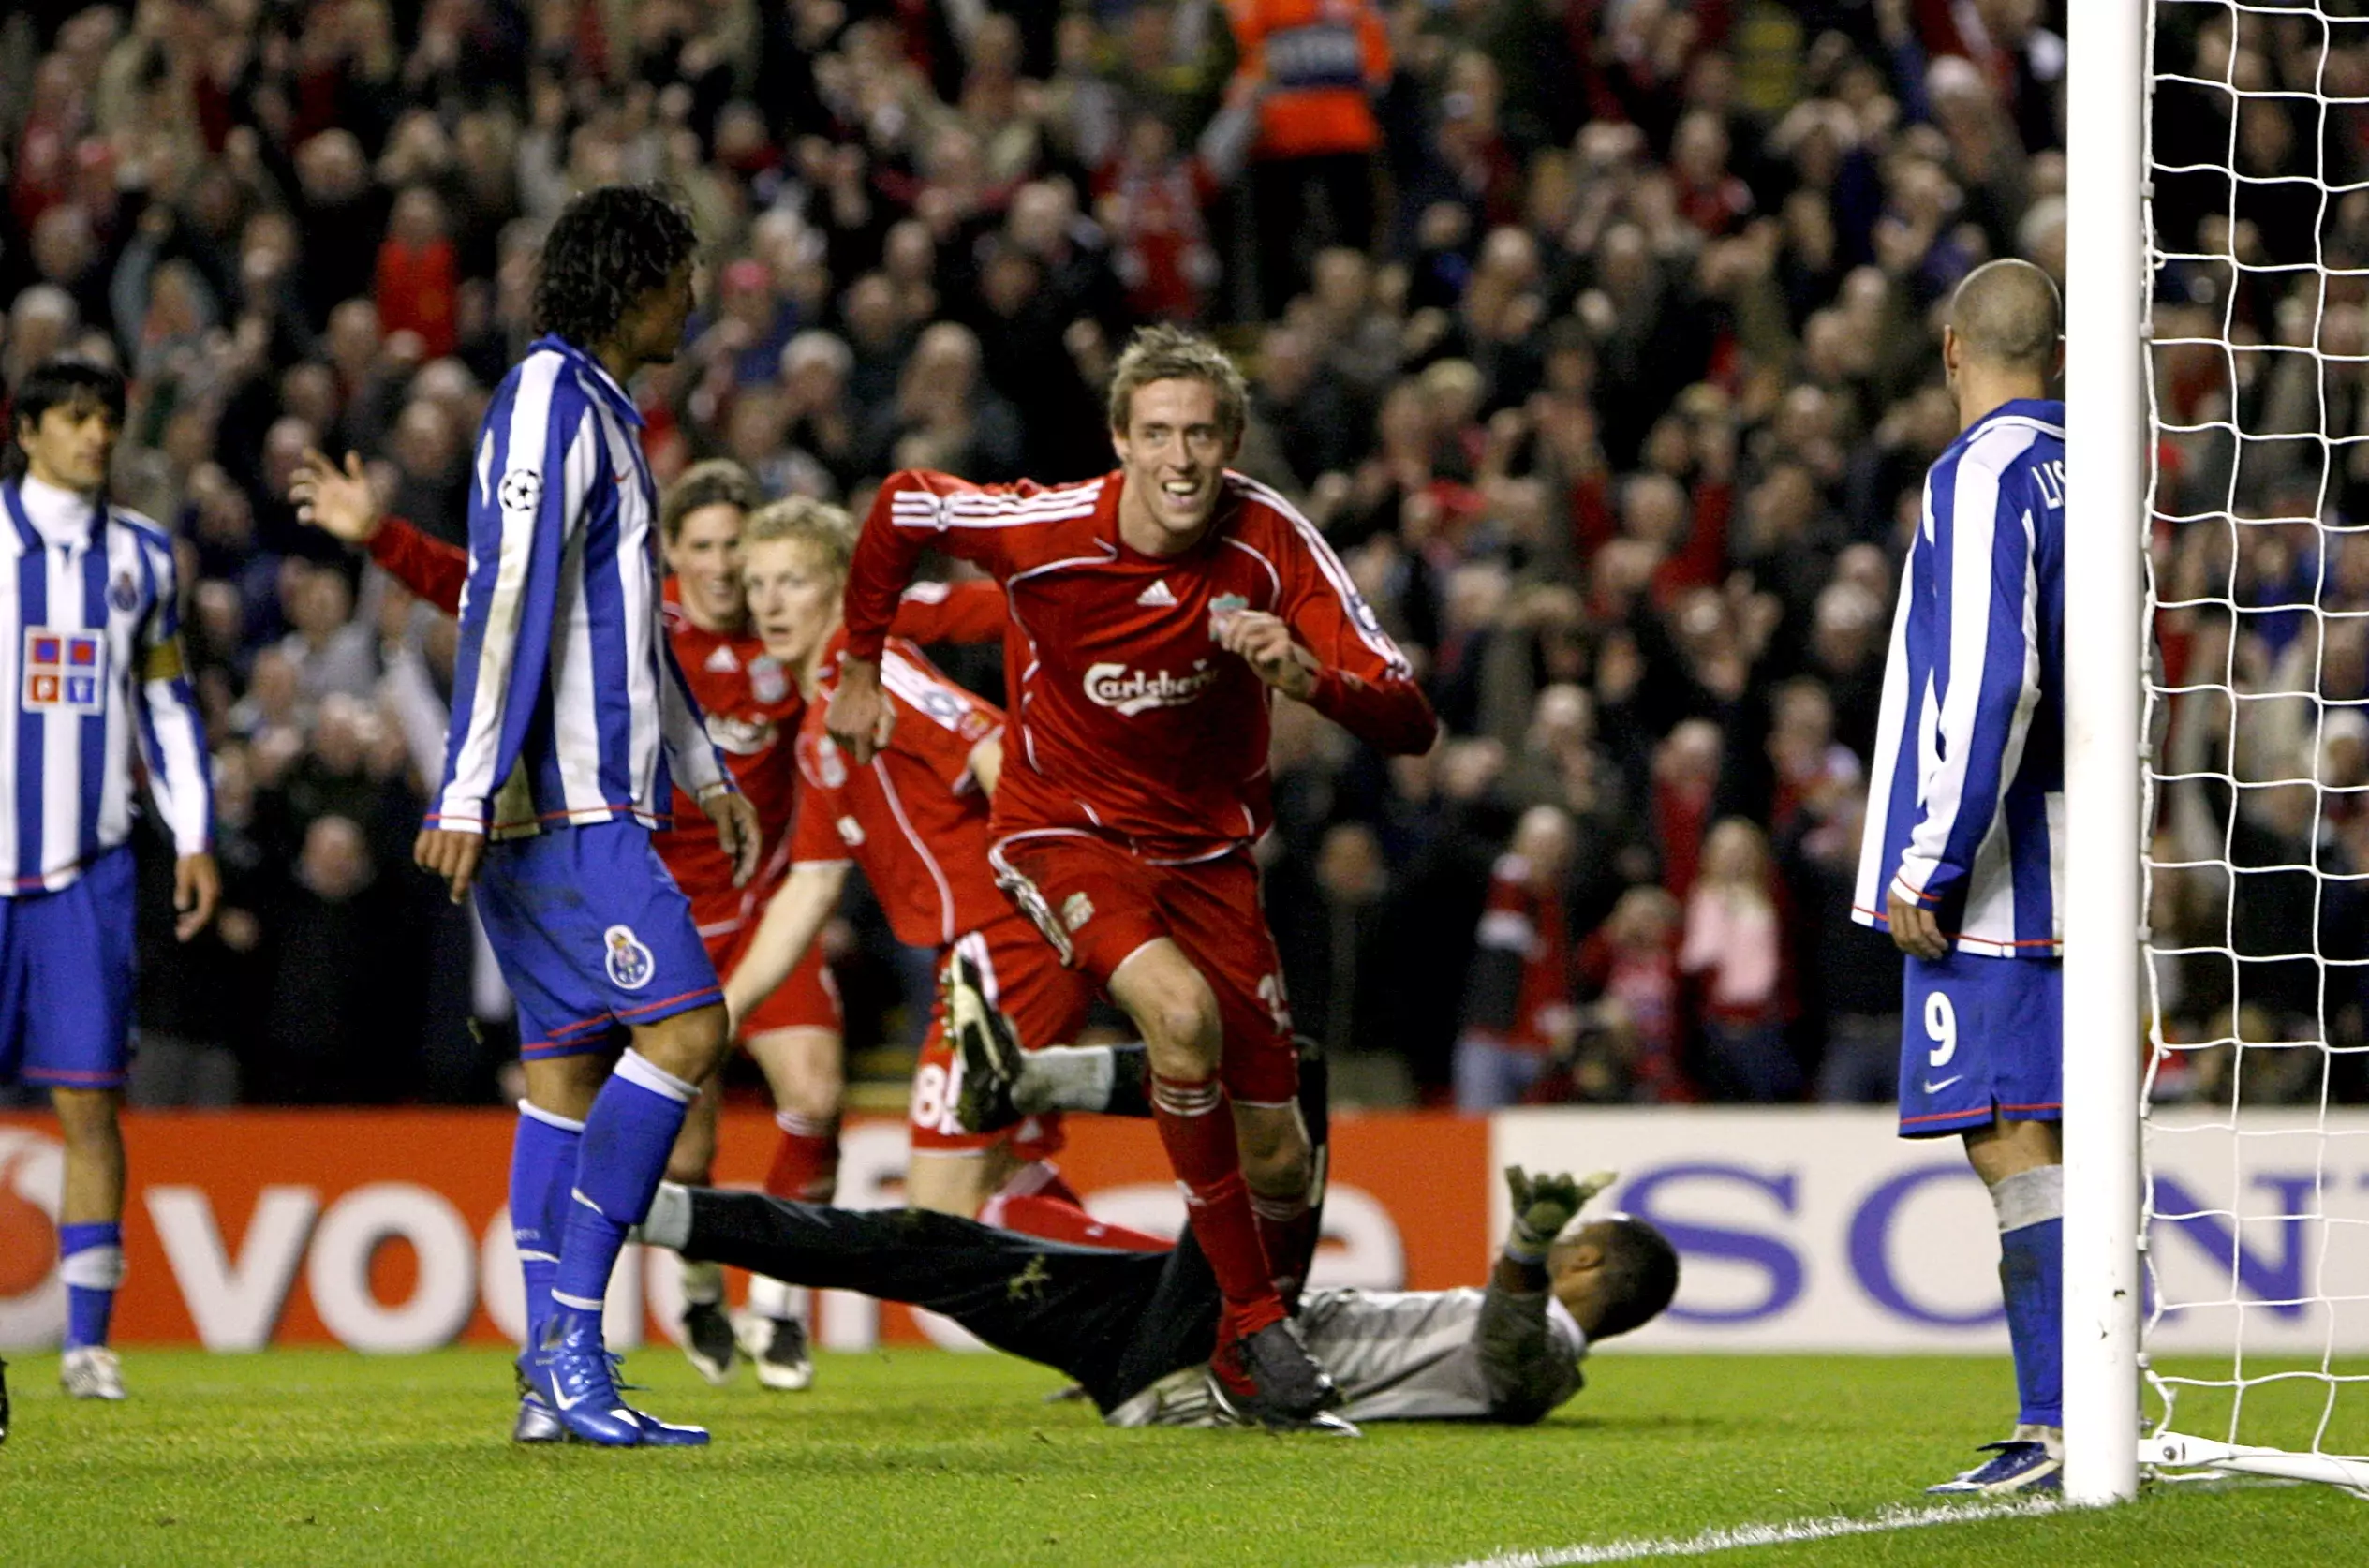 Crouch has experience in Europe playing for Liverpool in the Champions League. Image: PA Images